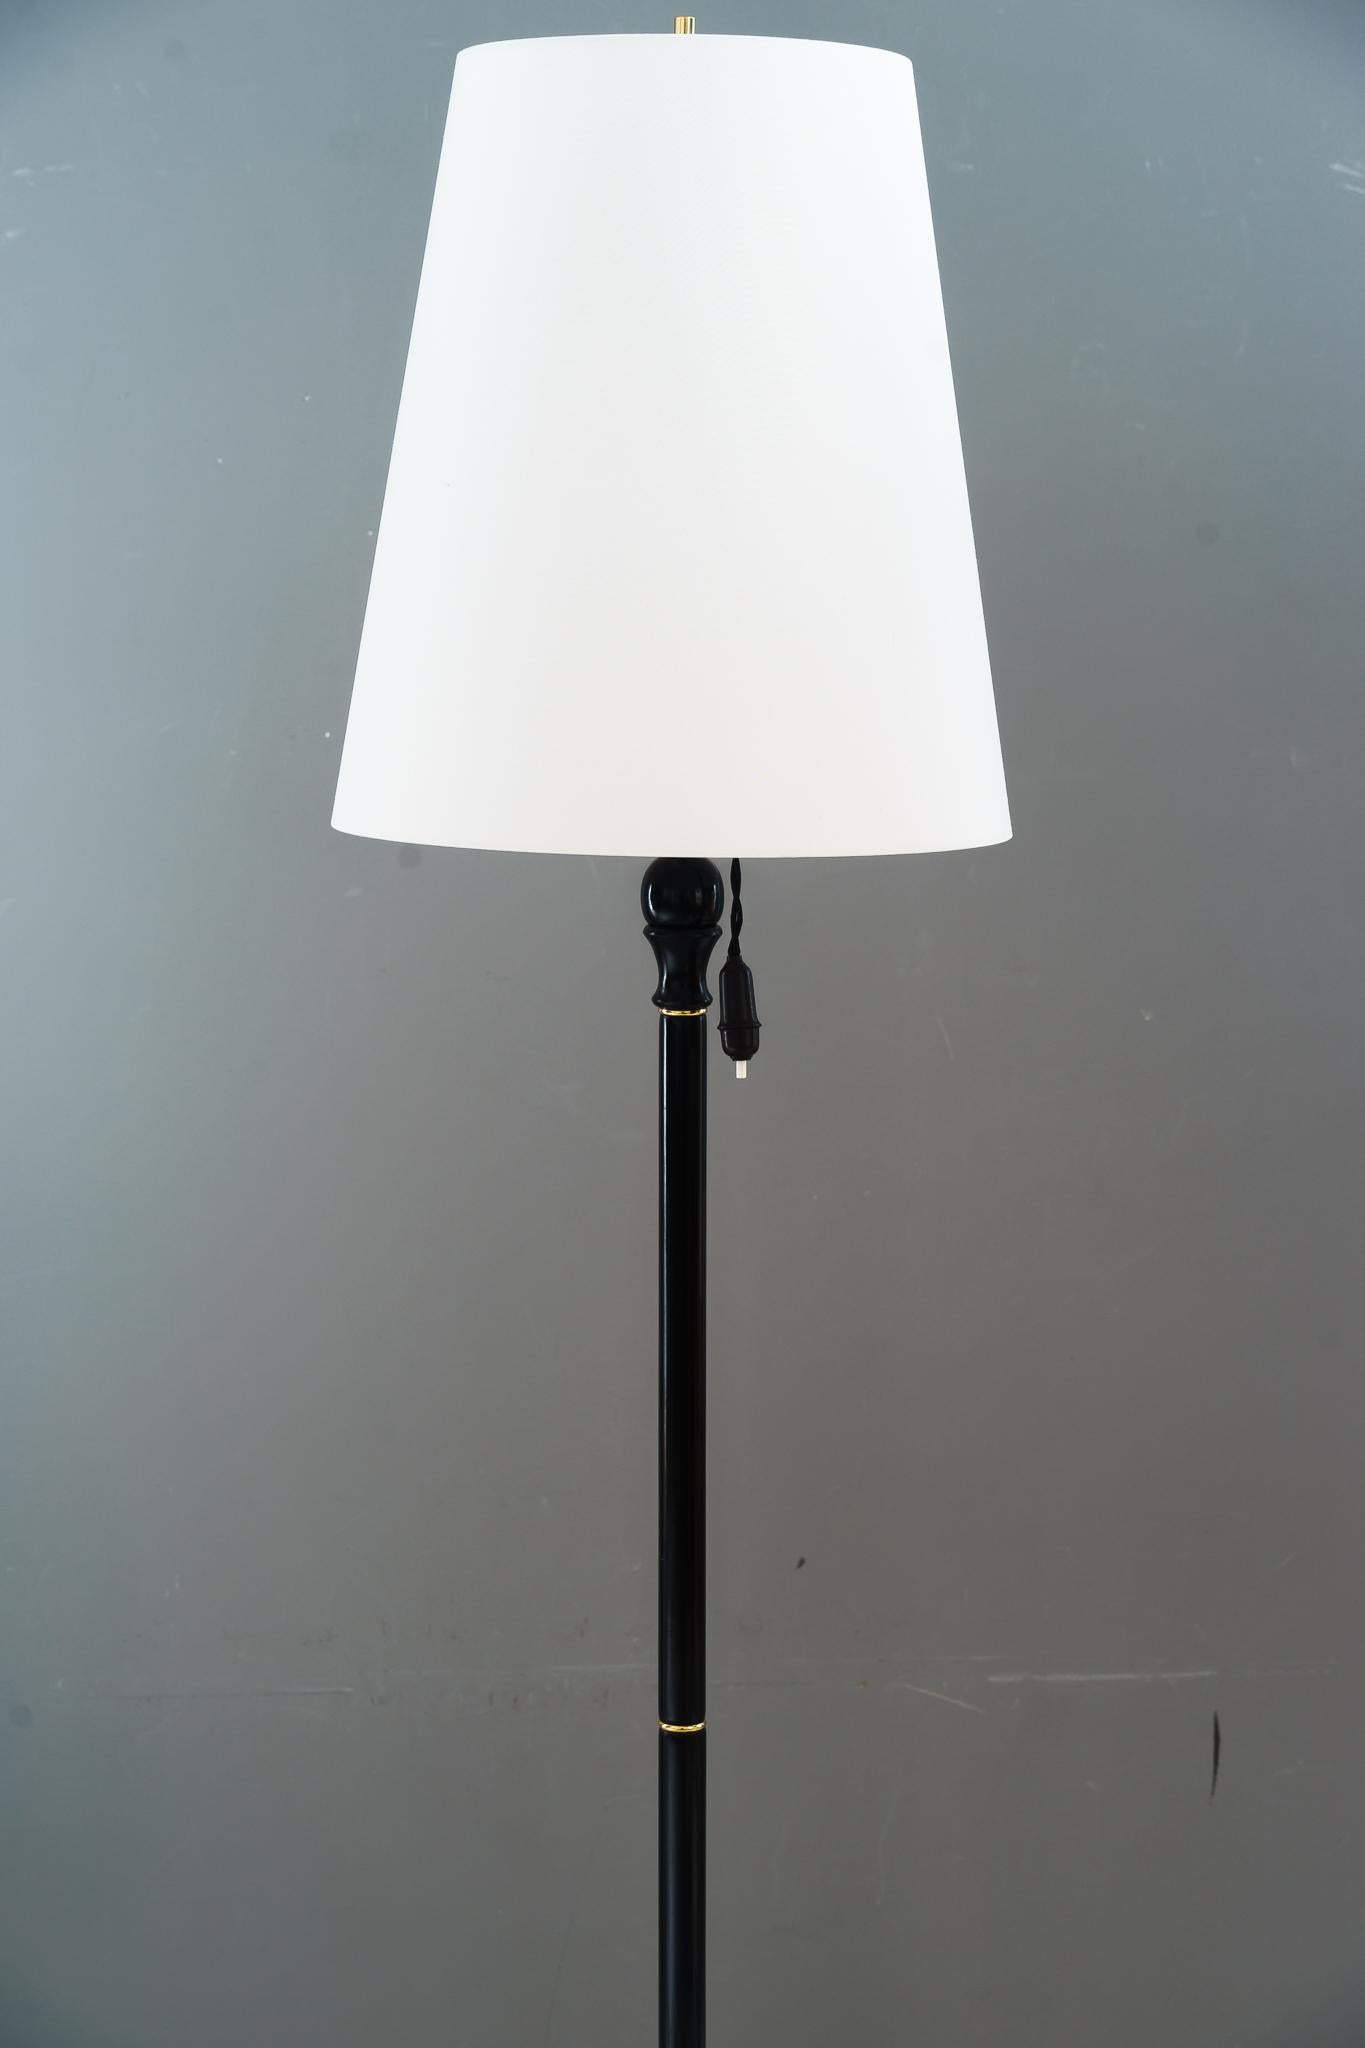 Wooden floor lamp vienna around 1960s
Brass parts polished and lacquered 
The shade is replaced ( new )
